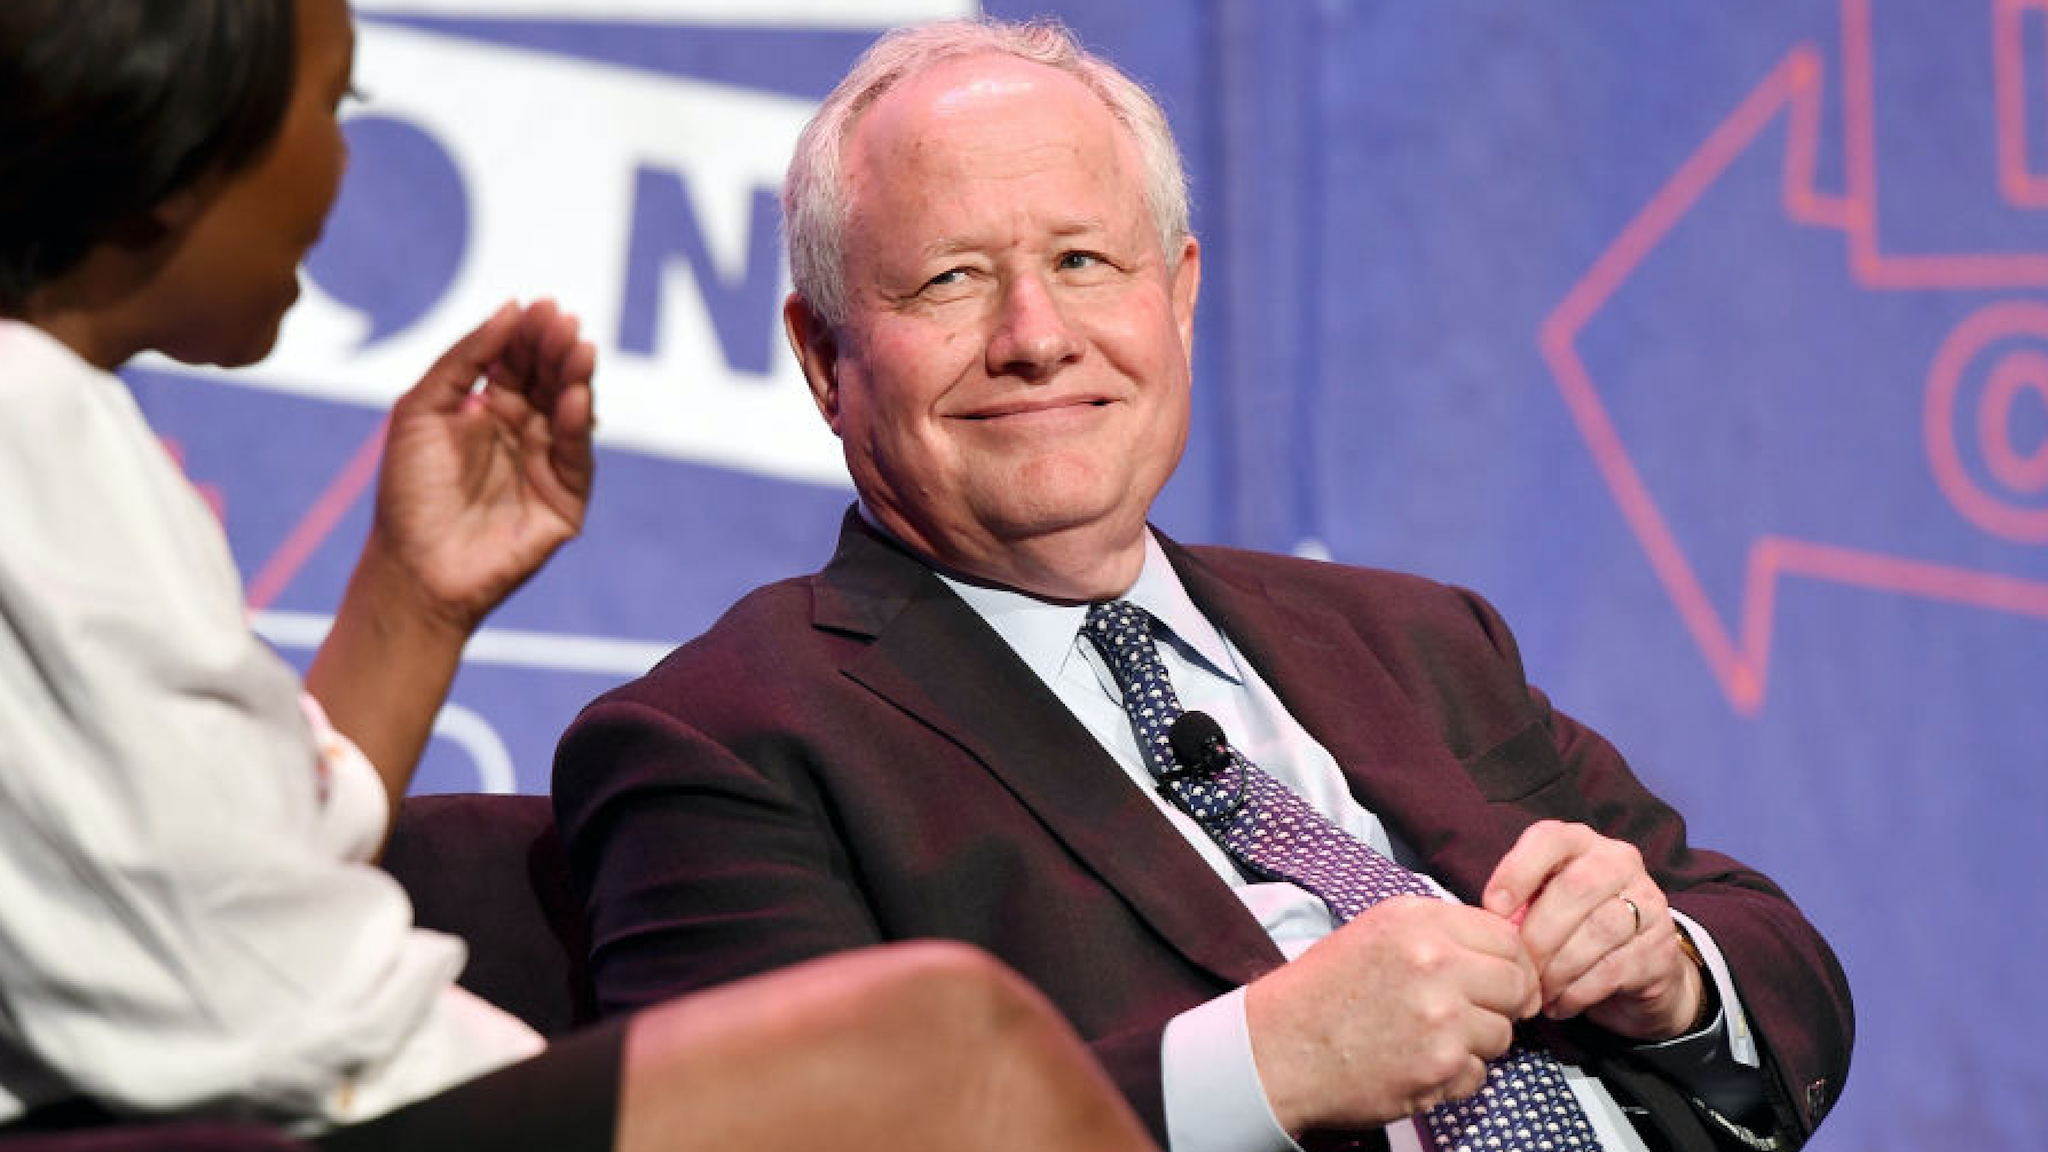 Moderator Joy-Ann Reid (L) and William Kristol at 'LBJ' panel during Politicon at Pasadena Convention Center on July 29, 2017 in Pasadena, California.